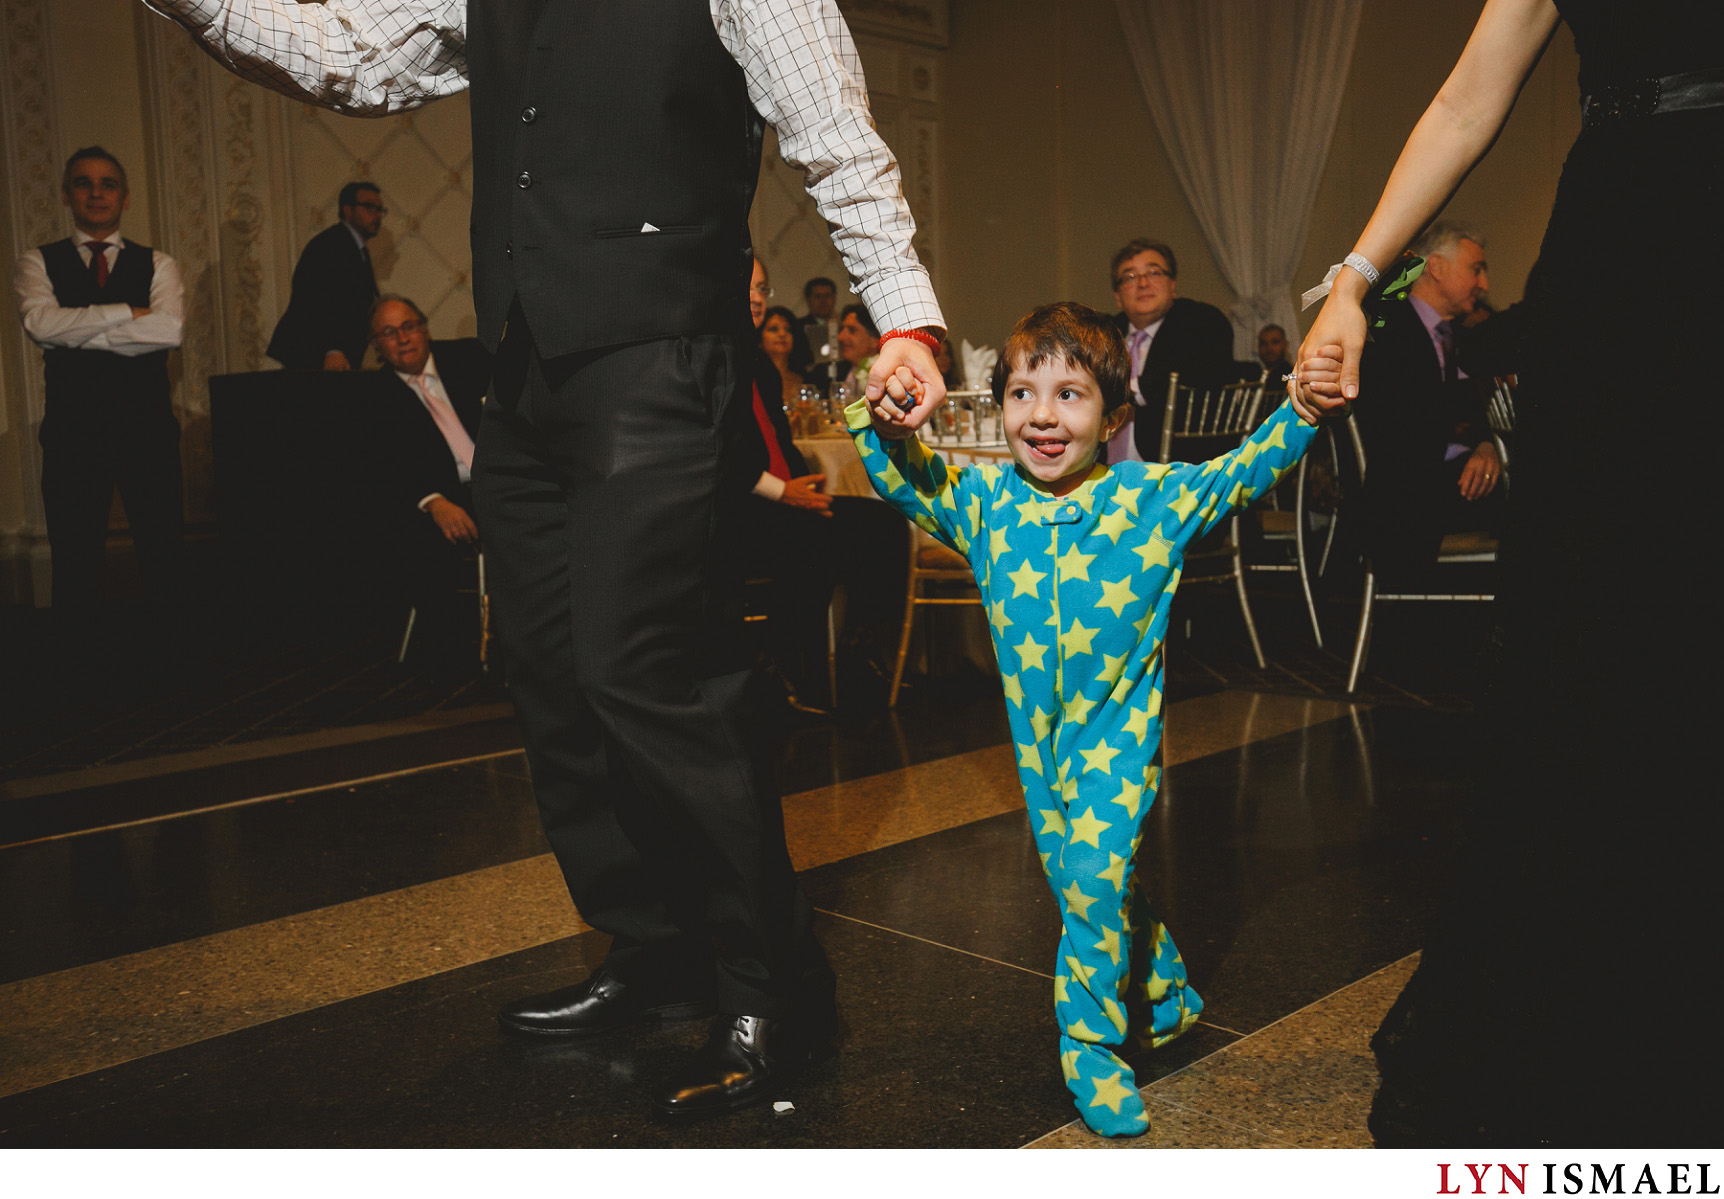 A little boy wearing star print onesie dances with his parents at a wedding reception in Vaughan, Ontario.